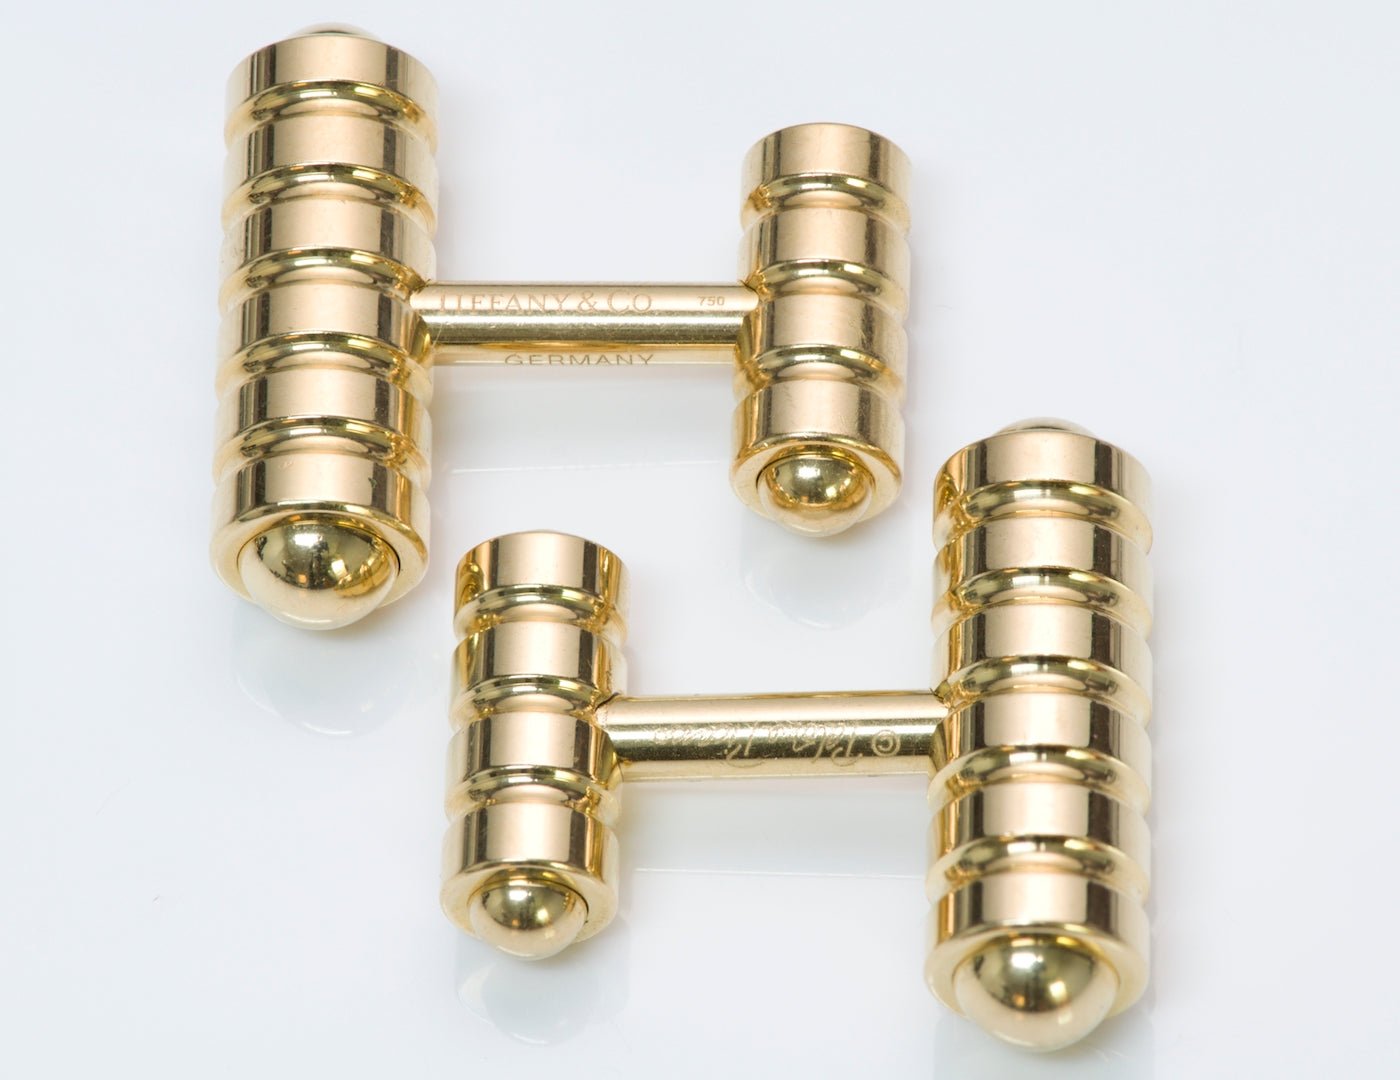 Tiffany & Co. Gold Cufflinks by Paloma Picasso